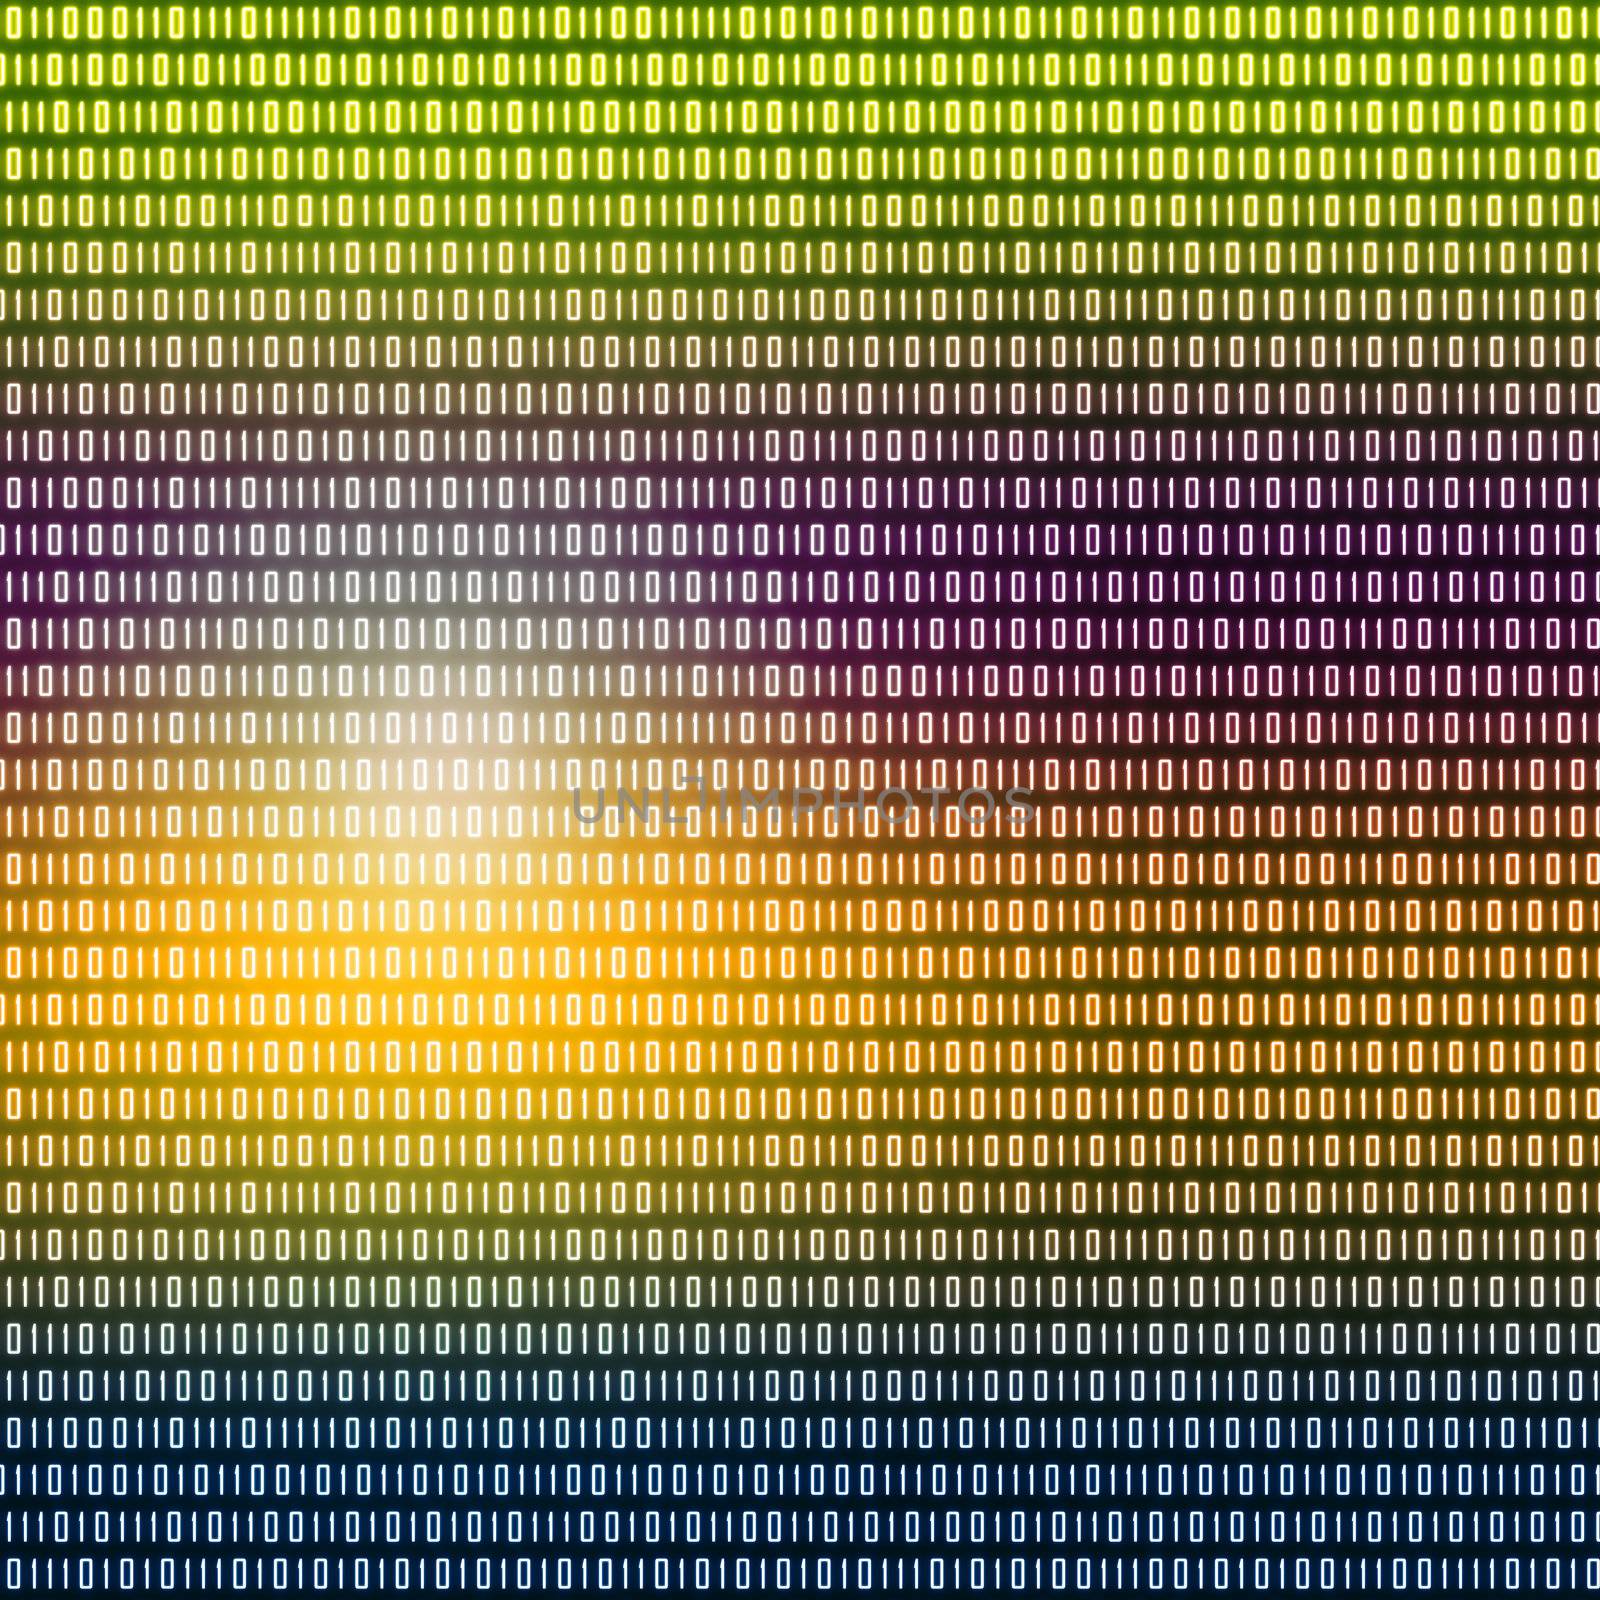 Multicolored binary code written against a black background